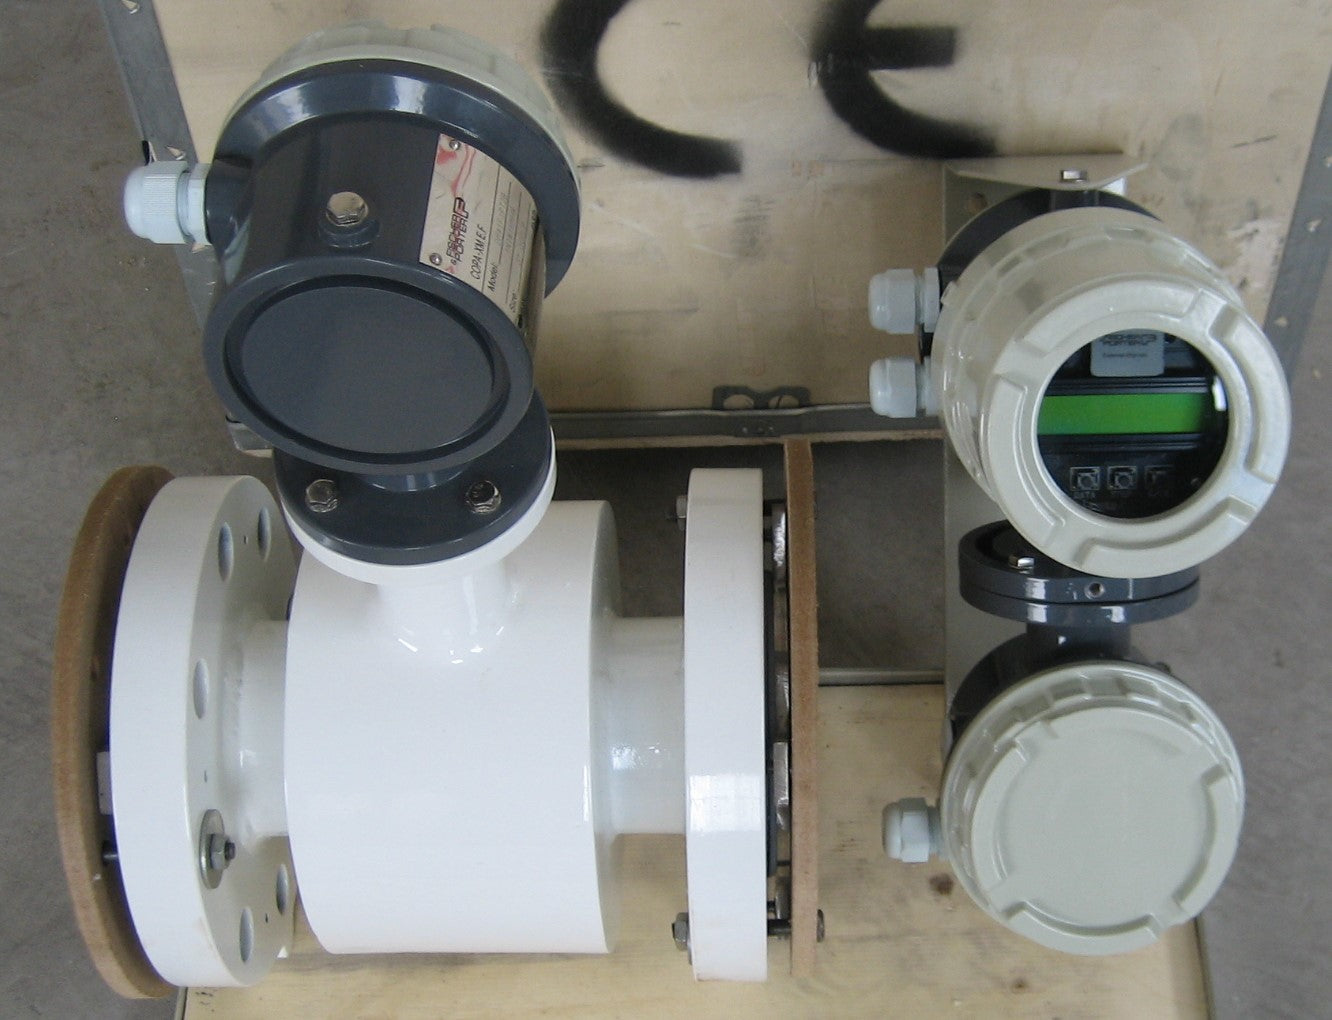 Fischer & Porter Electromagnetic Flow Meter - Inquire about the price with your specific configuration